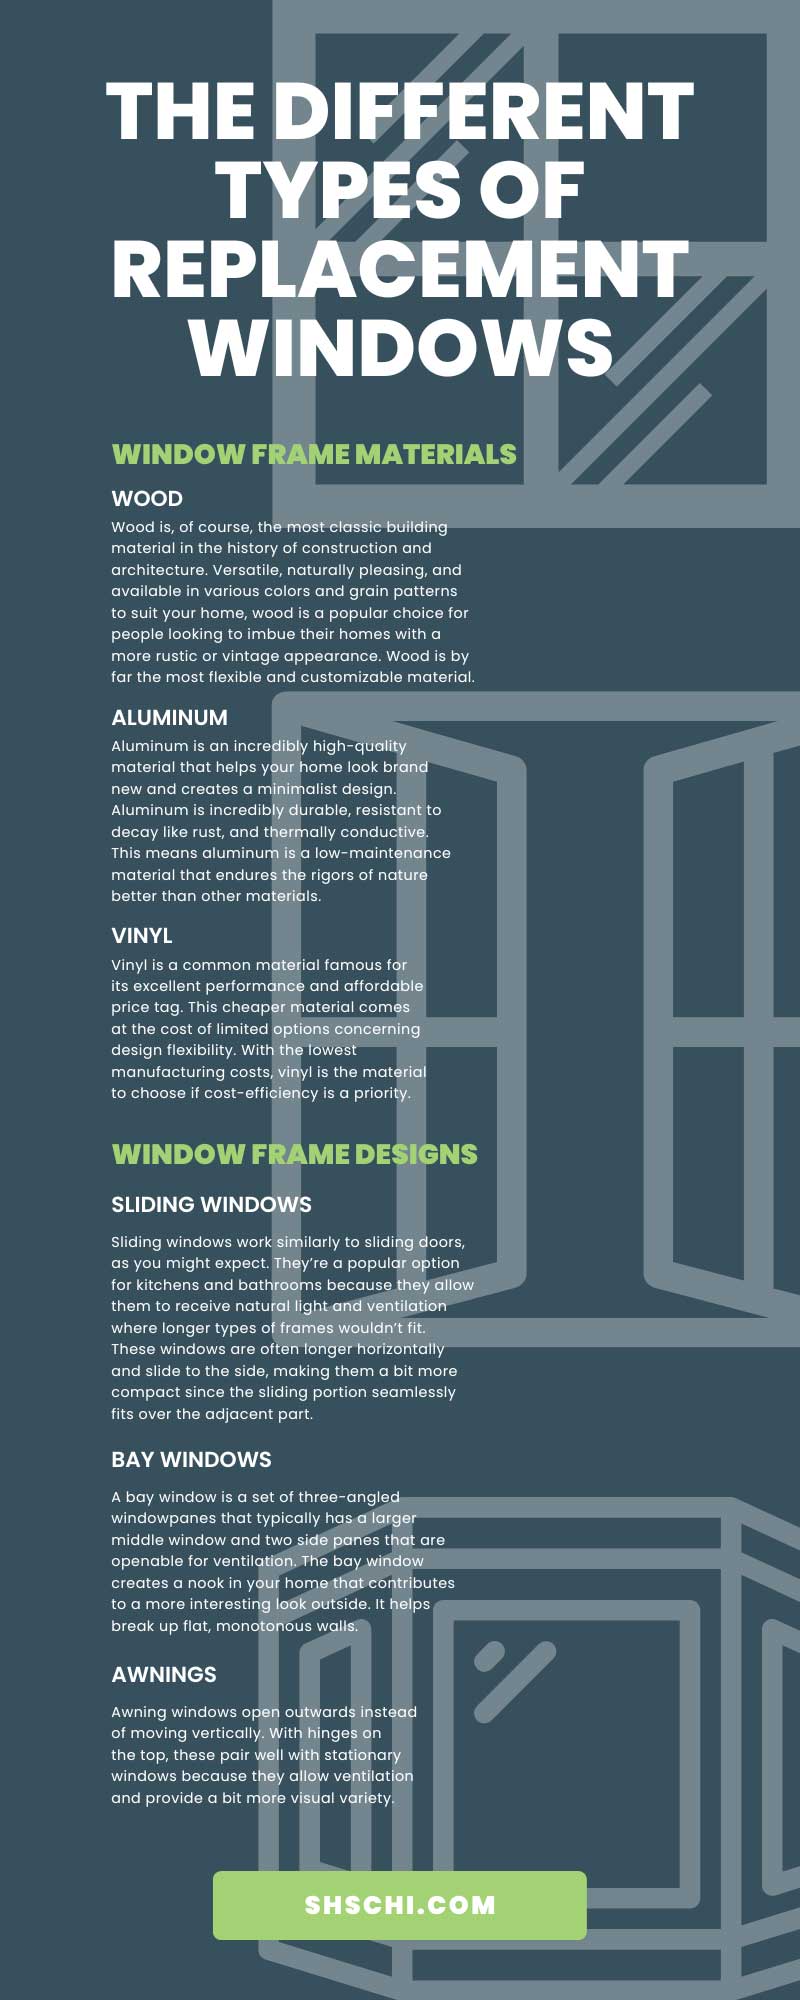 The Different Types of Replacement Windows